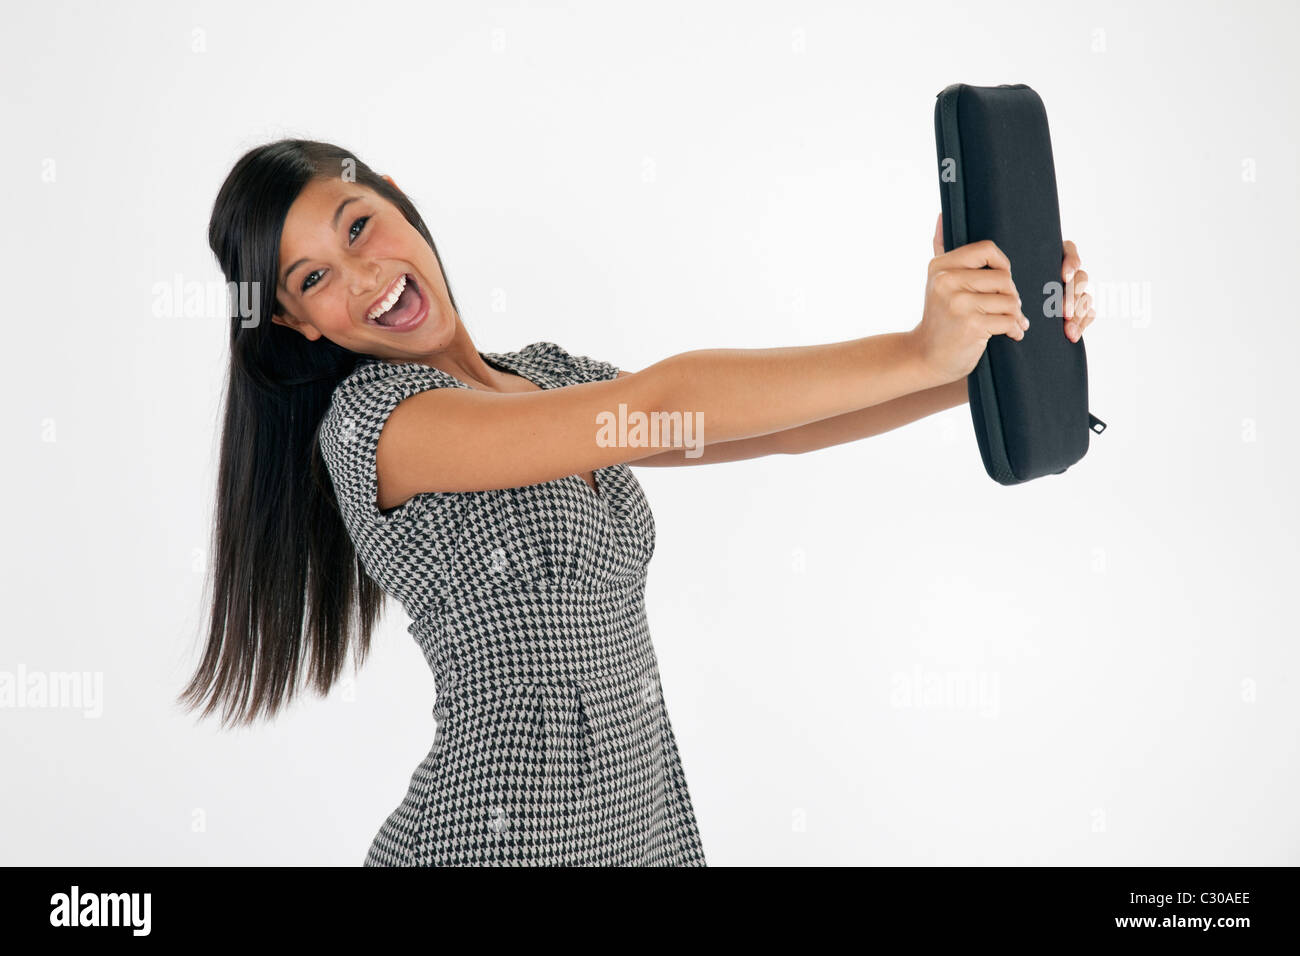 Pretty young Asian woman laughs while holding out a laptop case against a white background. Horizontal shot. Stock Photo